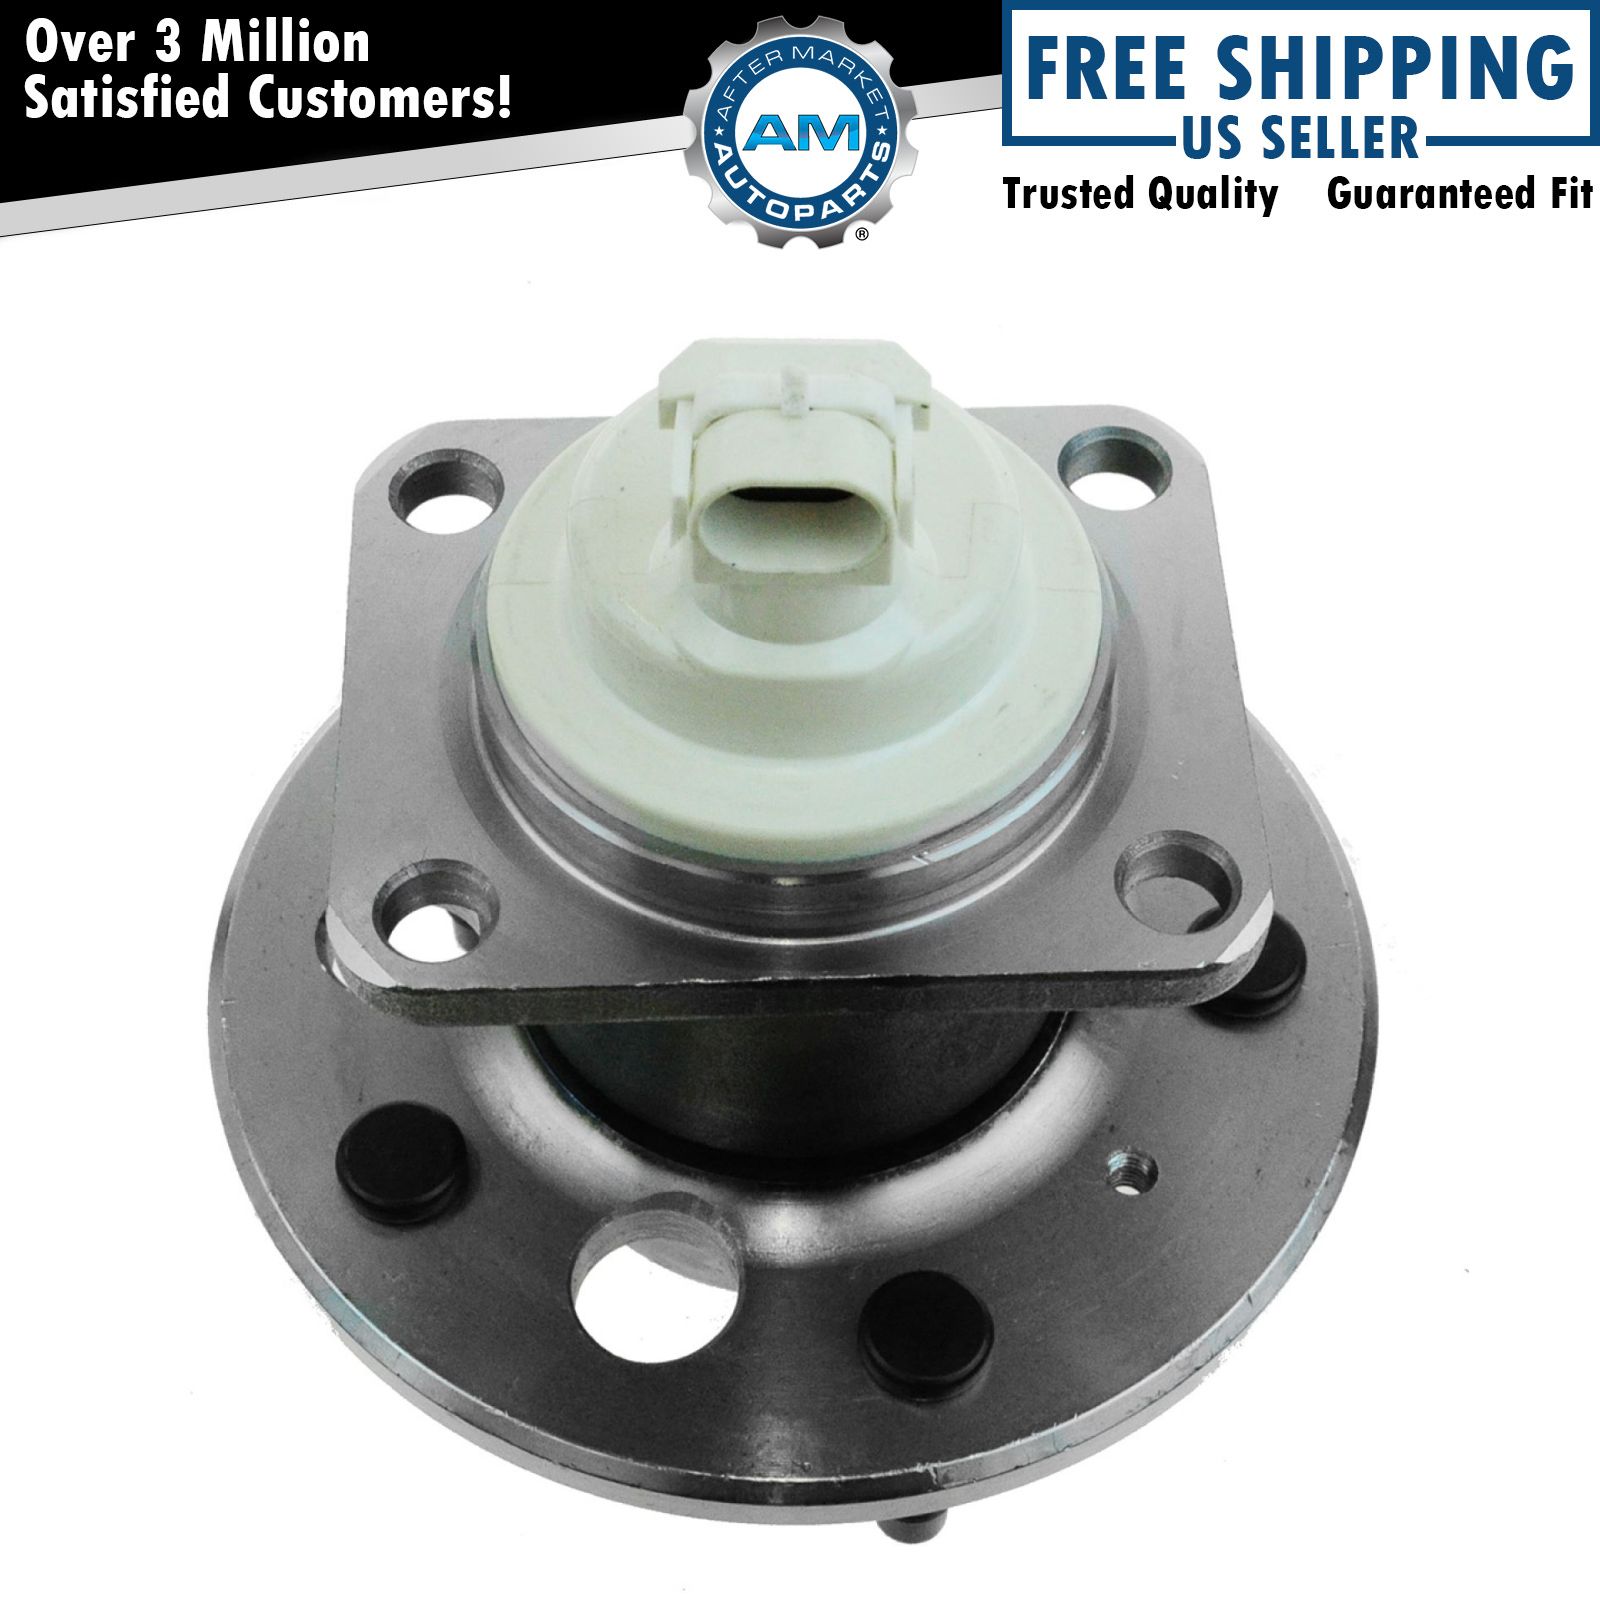 New REAR Wheel Hub and Bearing Assembly for GM Vehicles w/ ABS